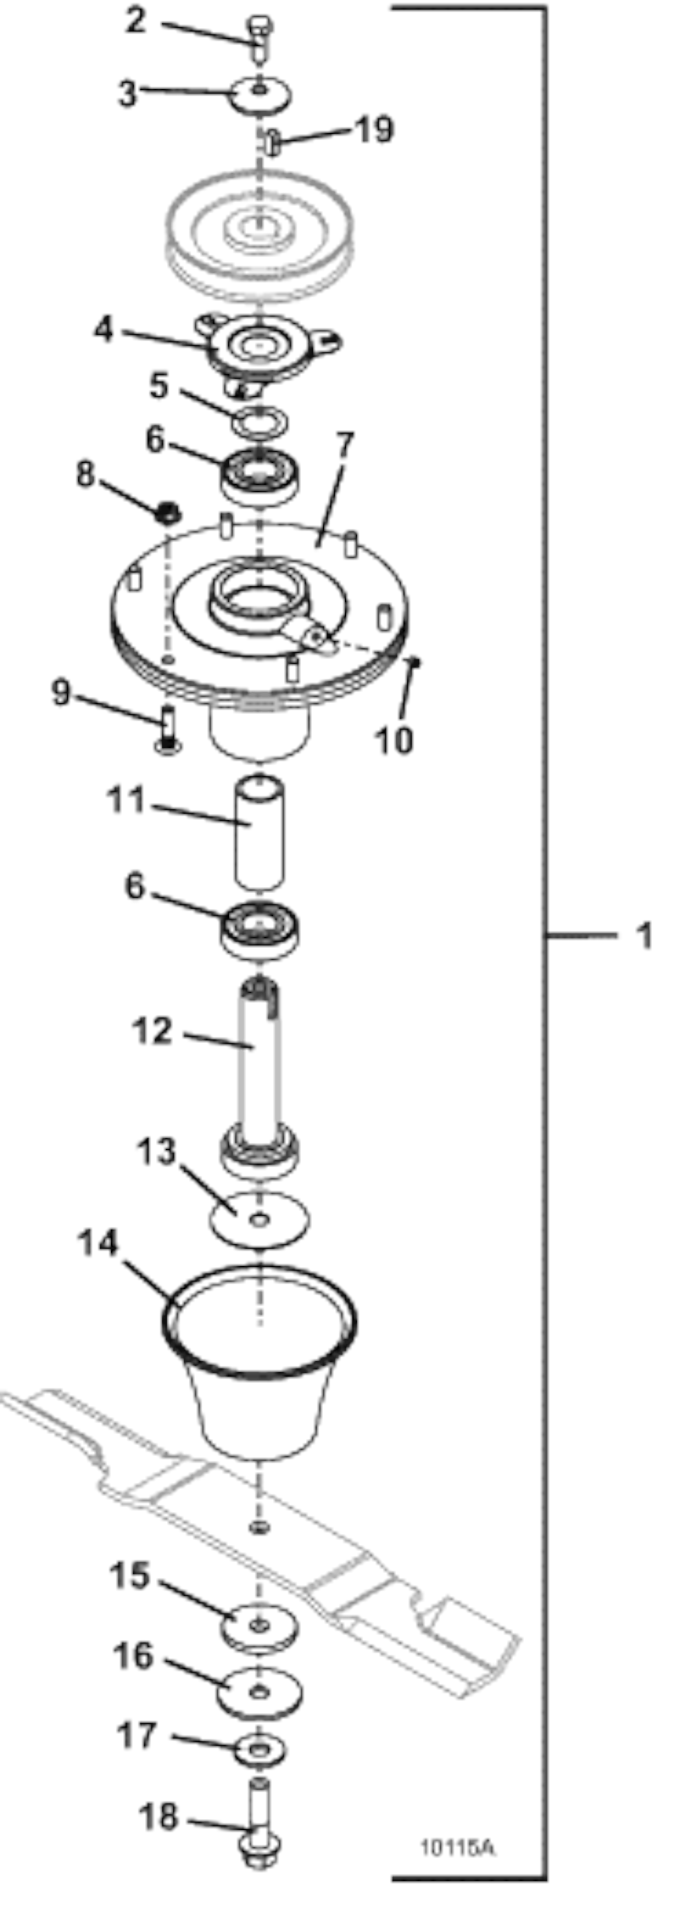 Blade Spindle Assembly Diagram